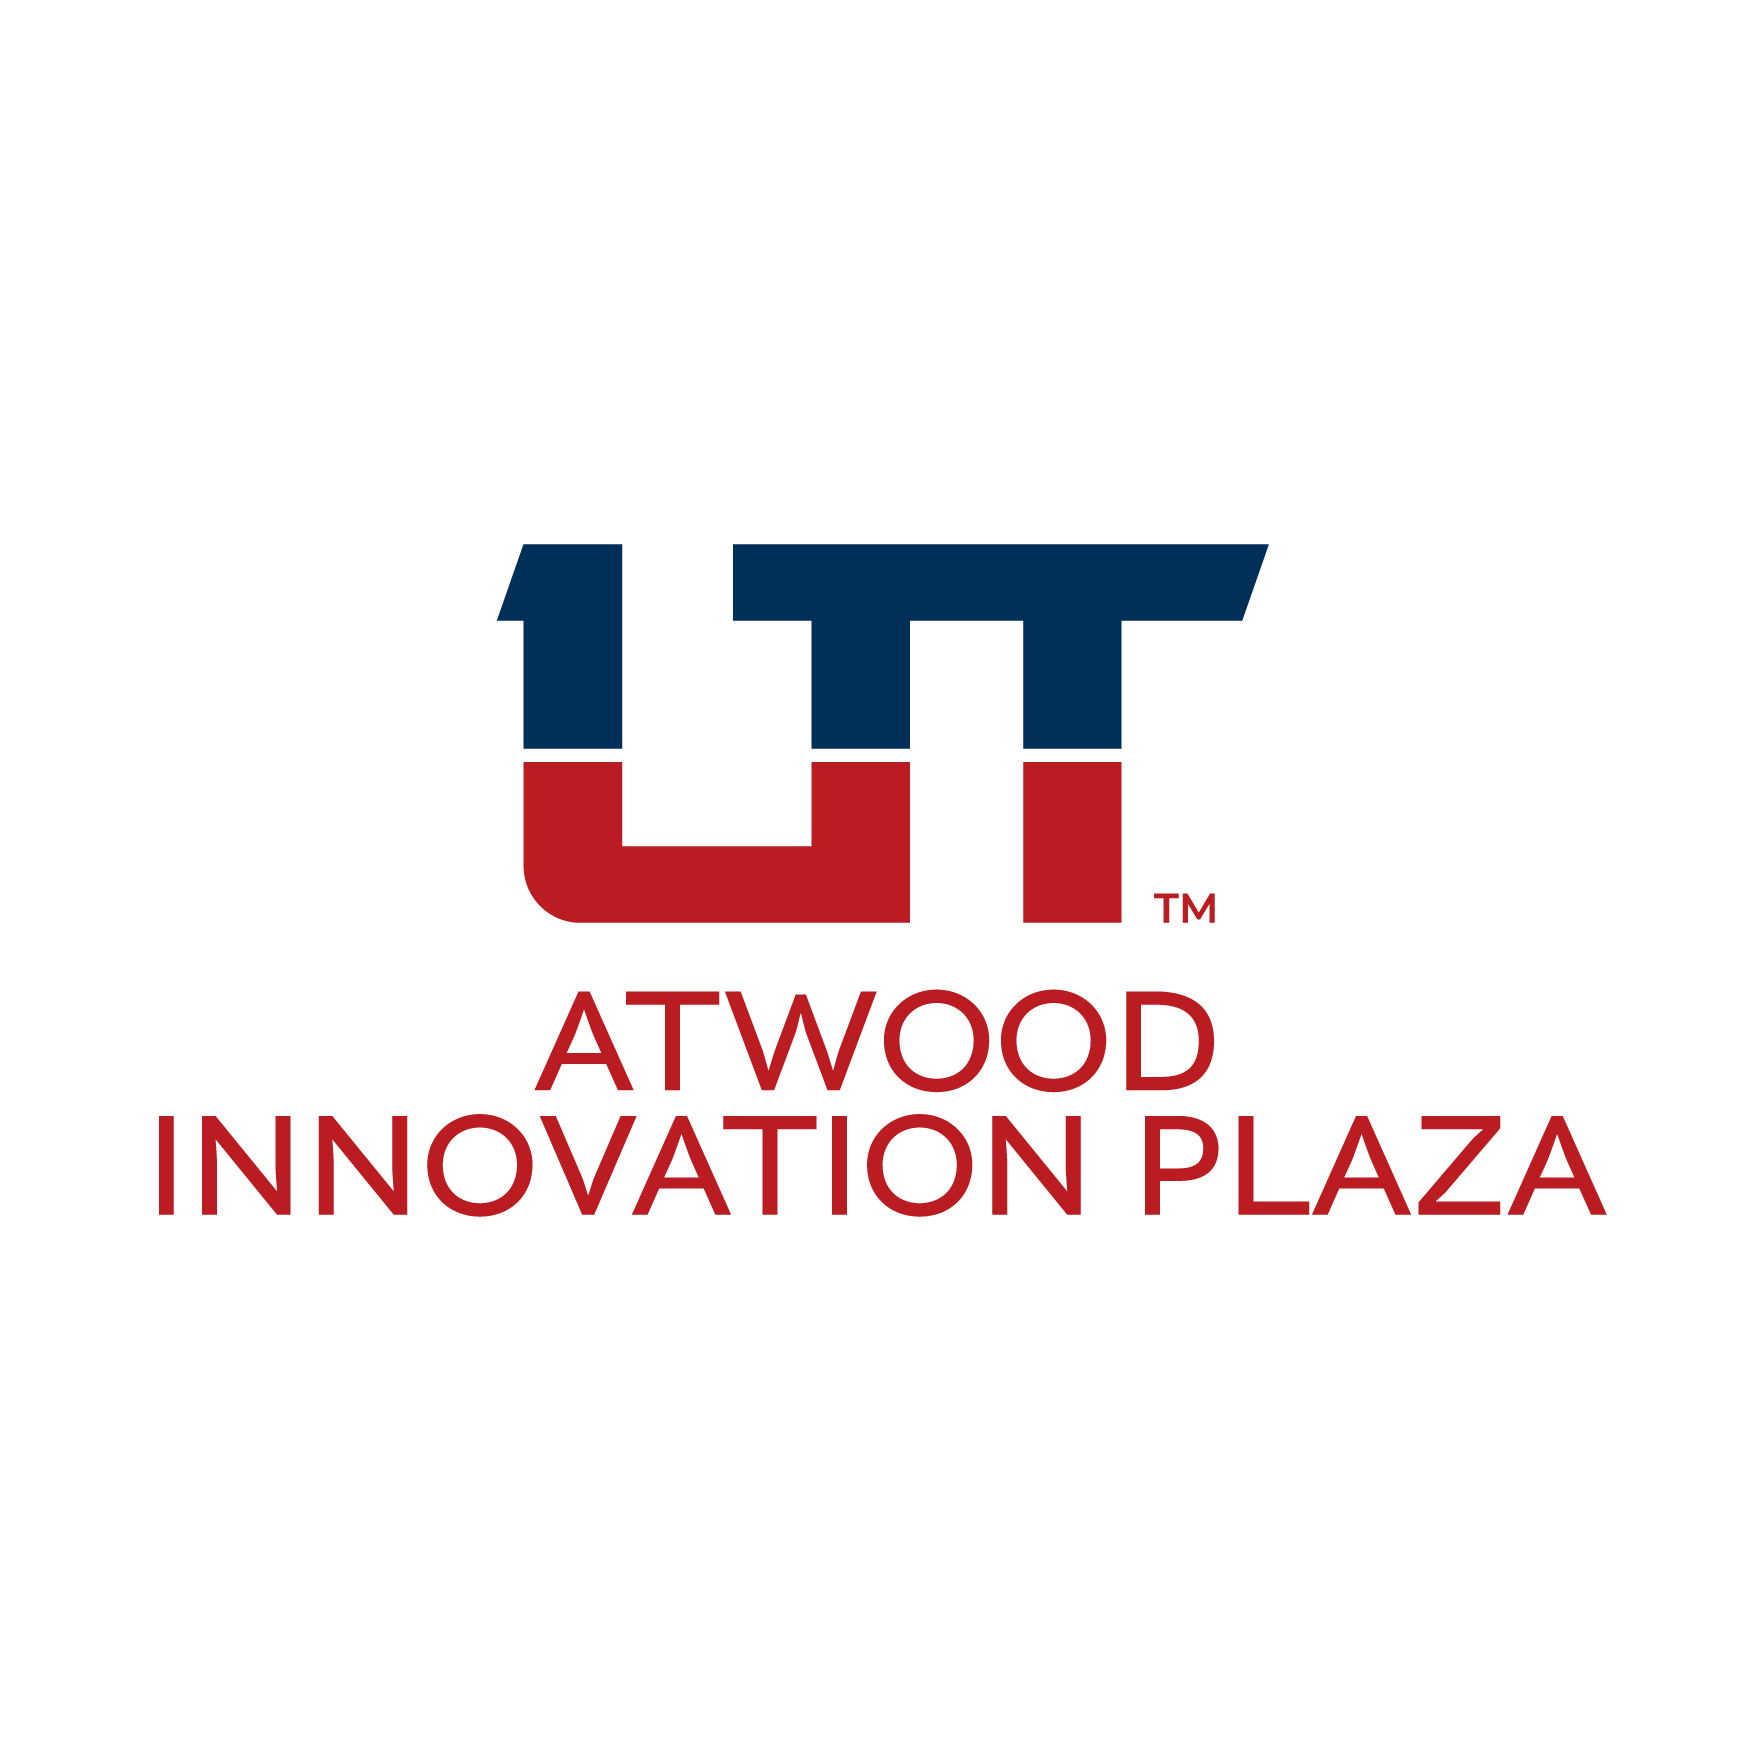 Makerspace (Atwood Innovation Plaza) logo